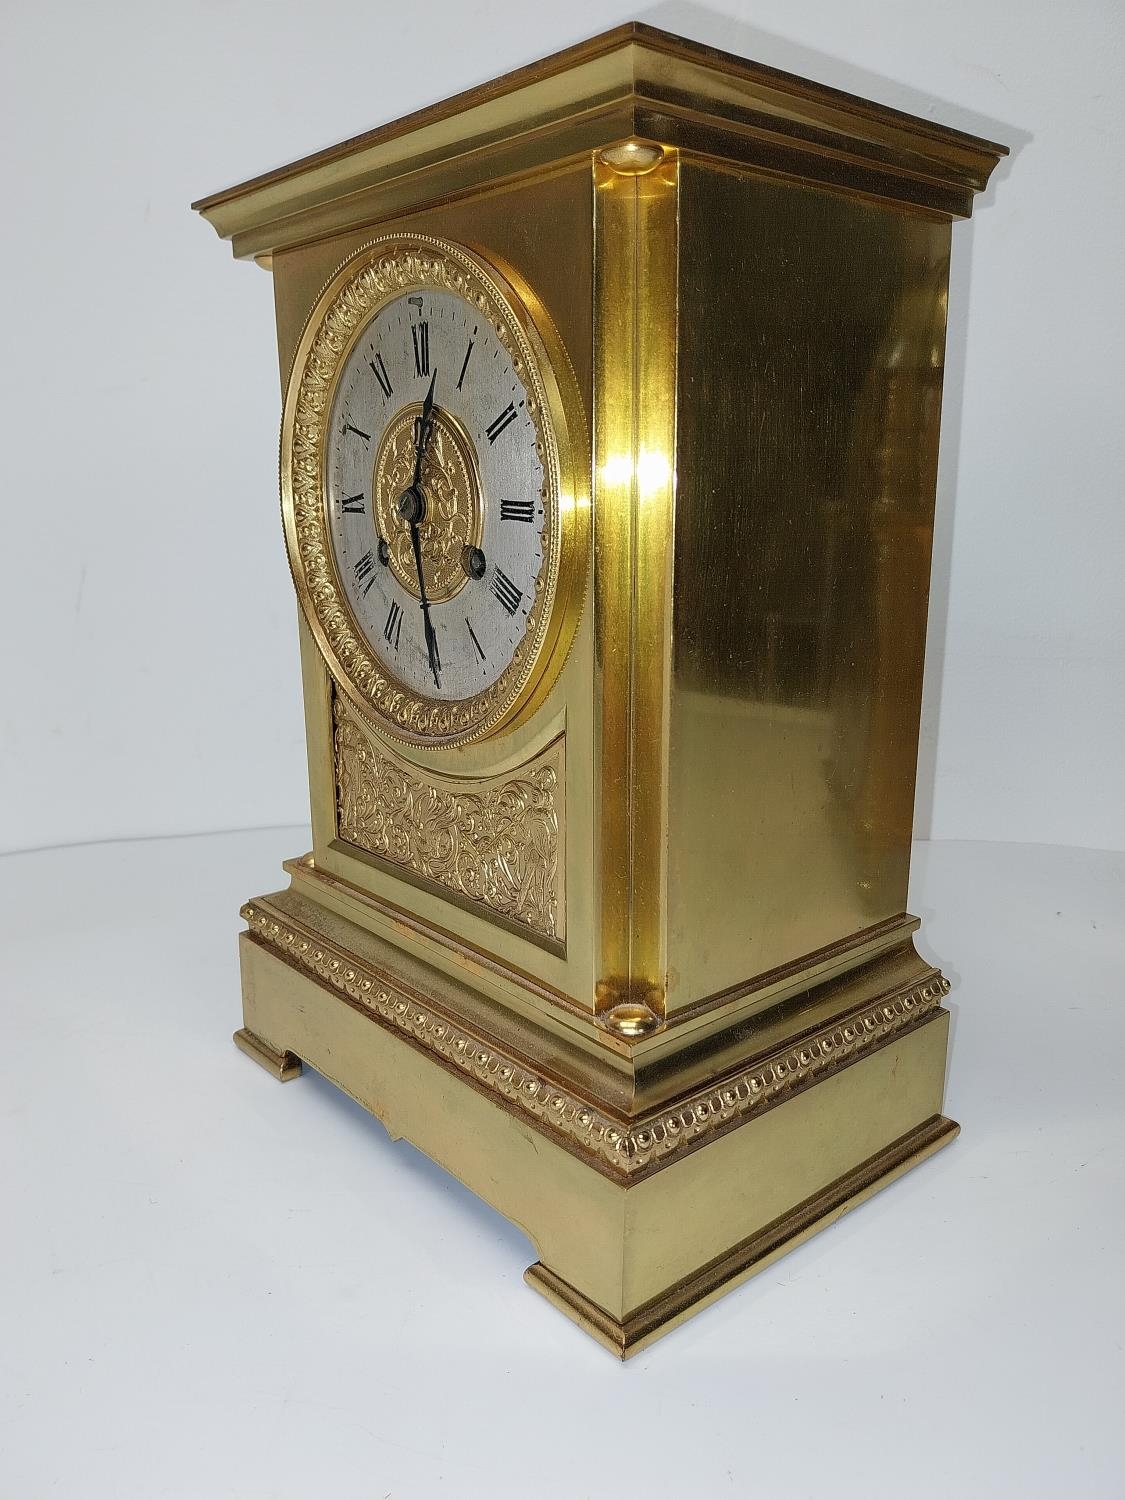 An early 20th century brass mantle clock with relief scrolling foliate and knight design, classical - Image 5 of 5